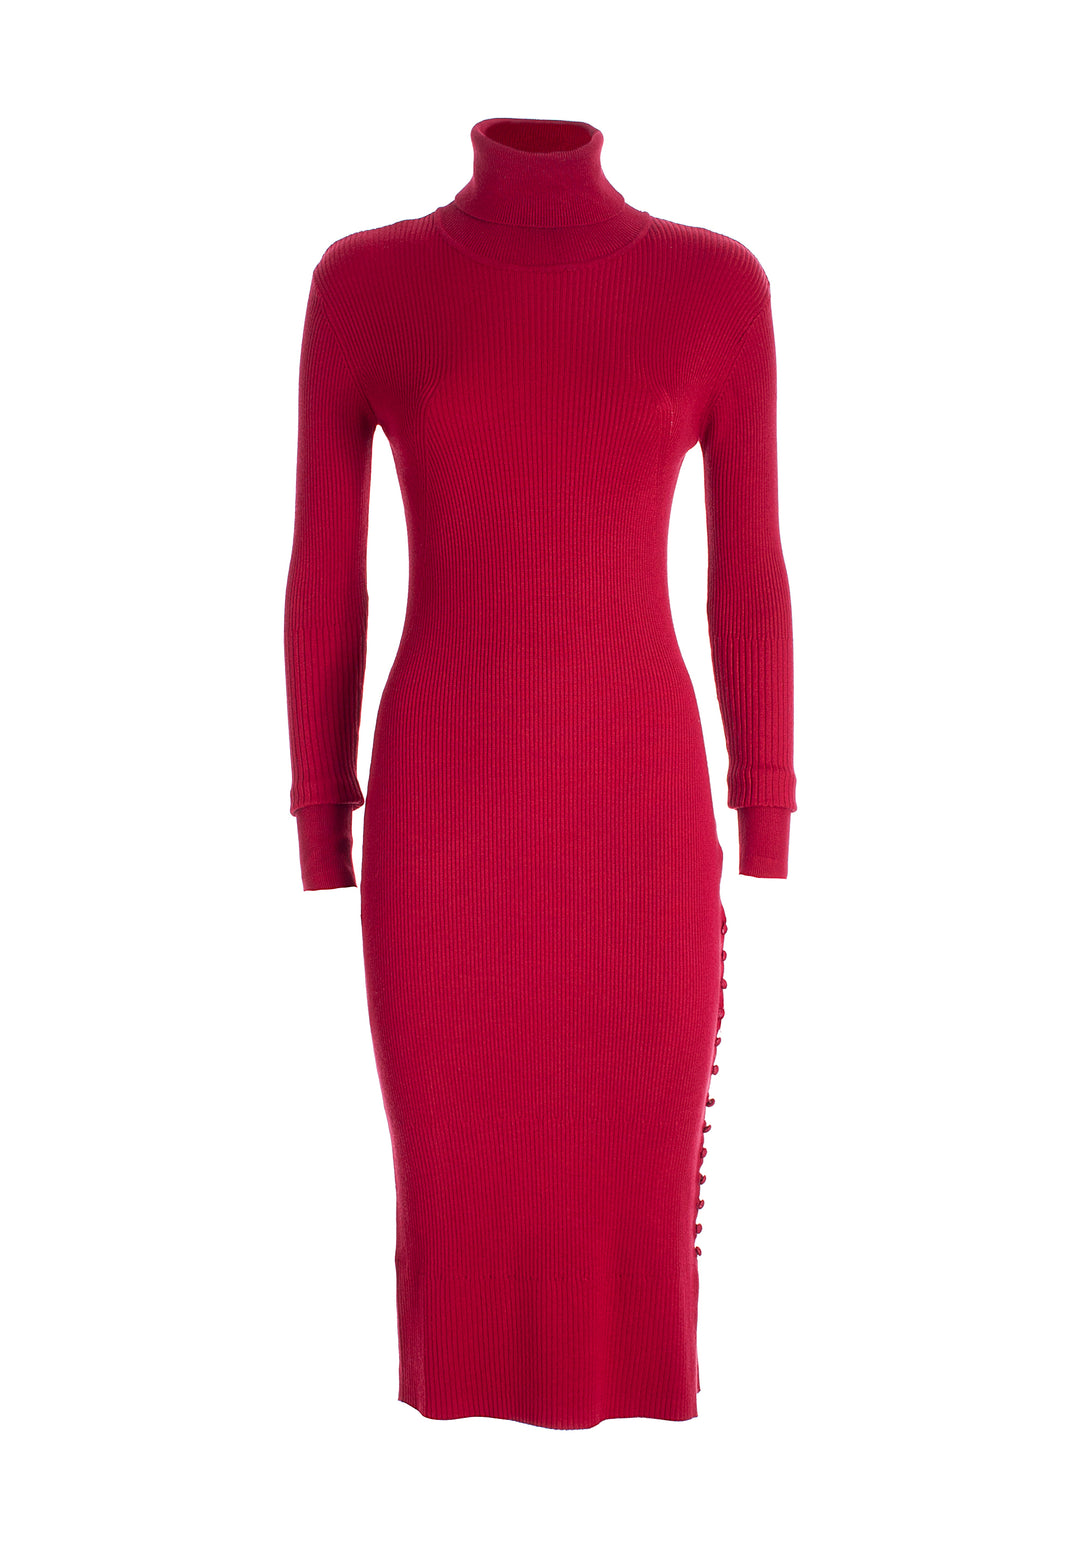 Knitted dress tight fit middle length made with rib stitch